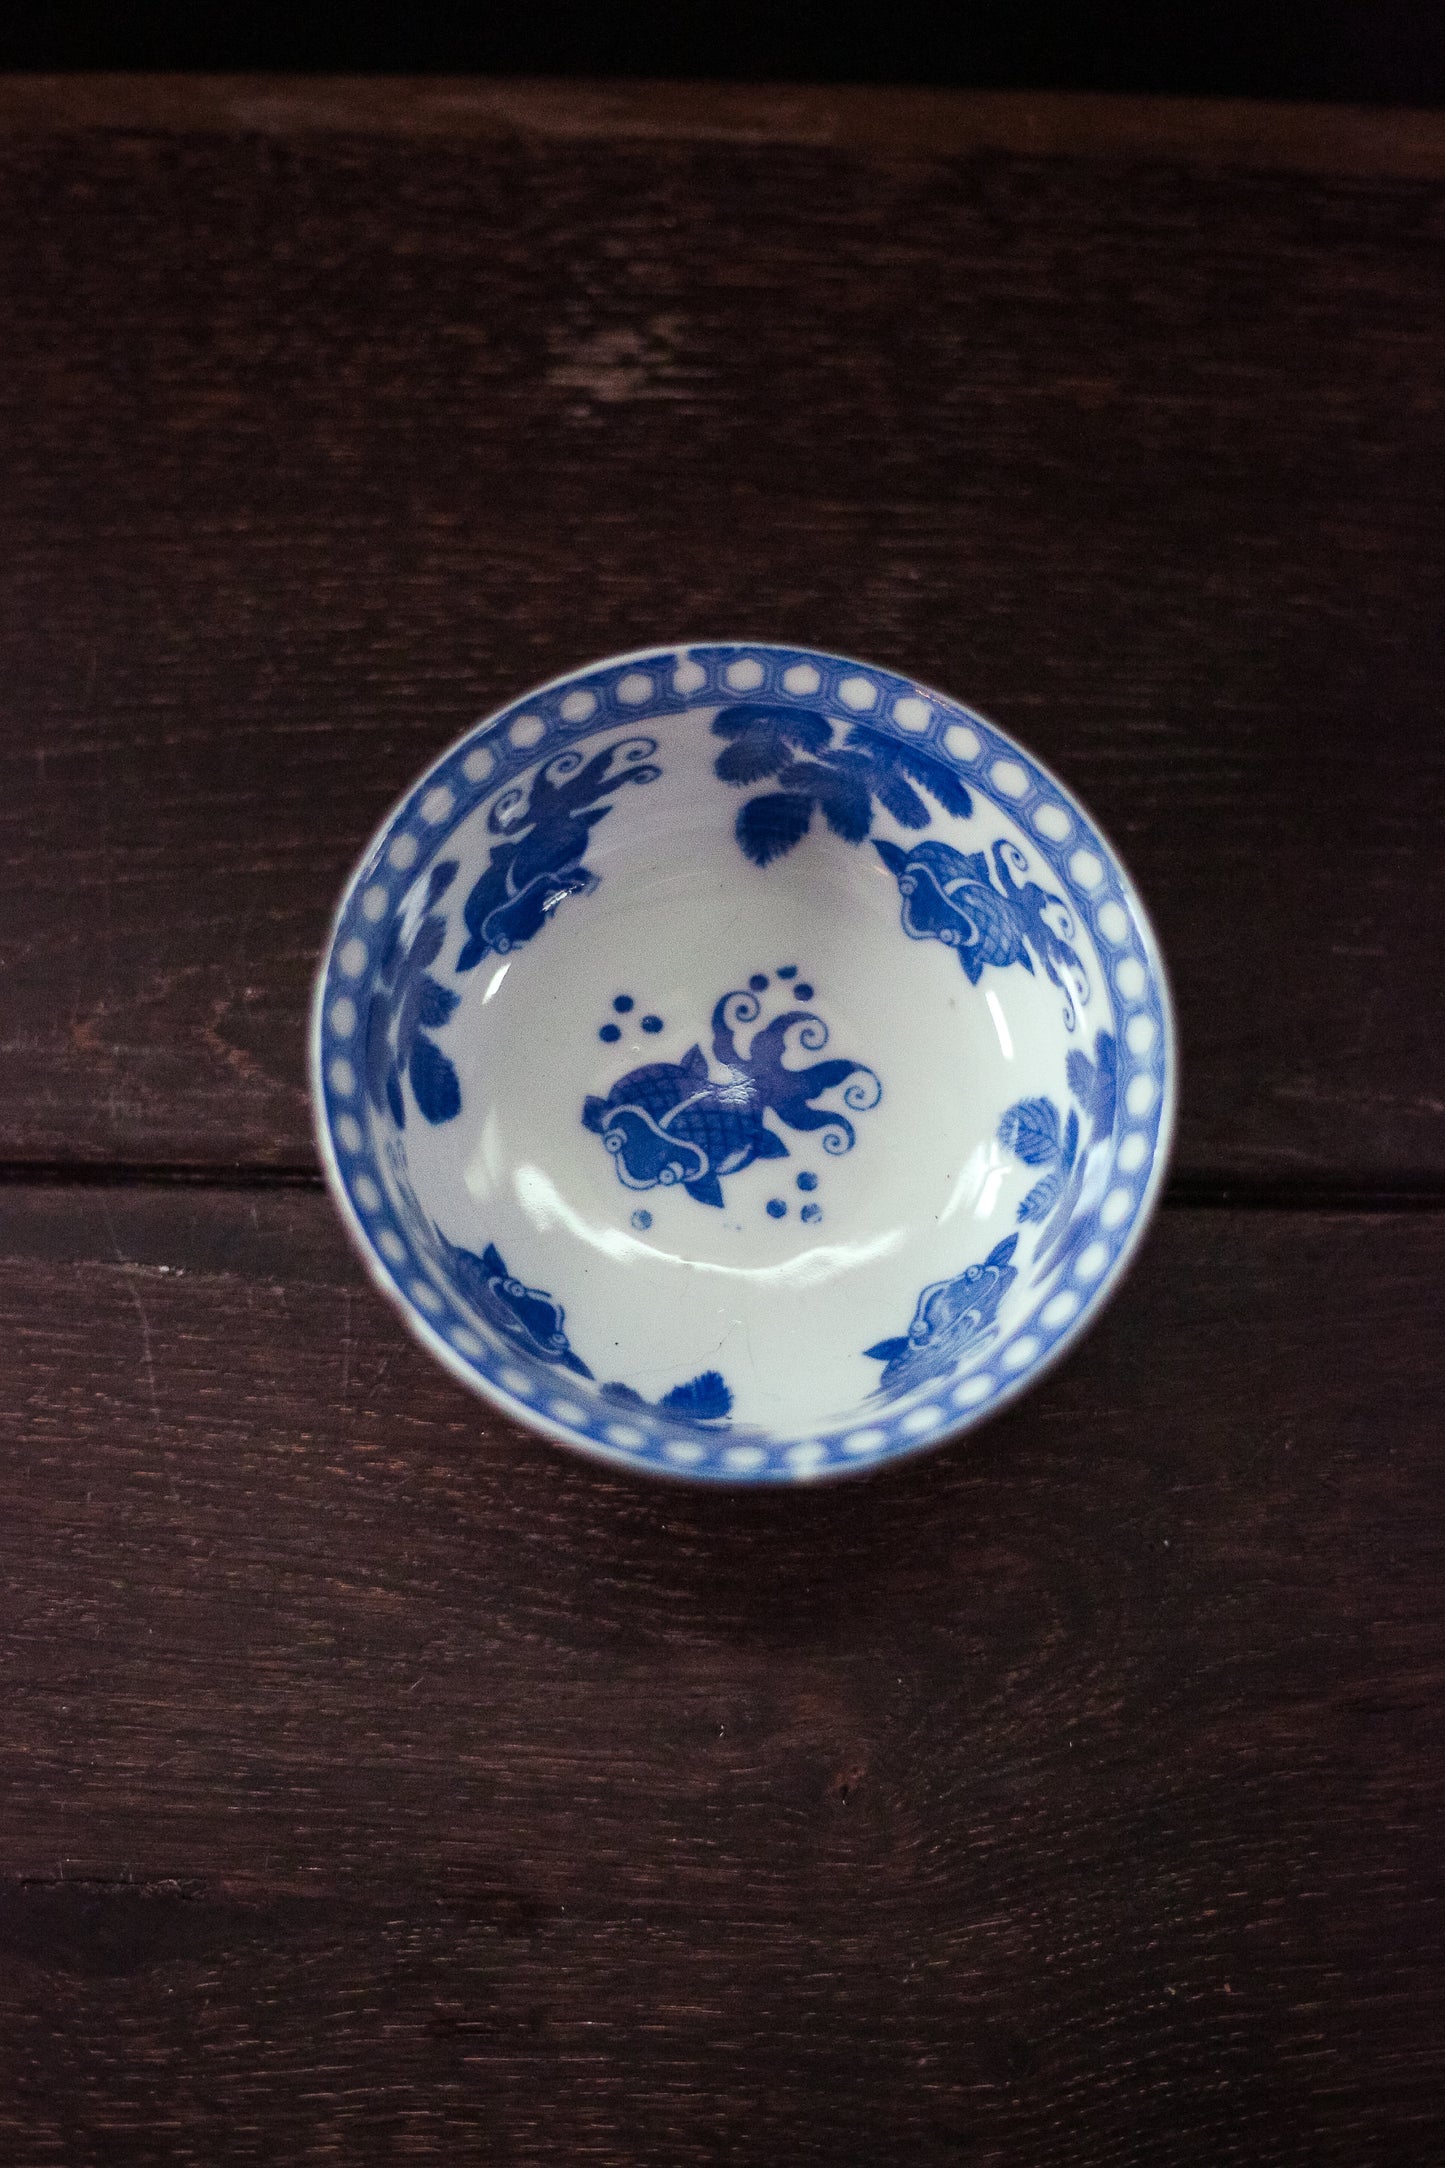 Small Blue White Bowl with Brown Exterior - Vintage Ceramic Bowl